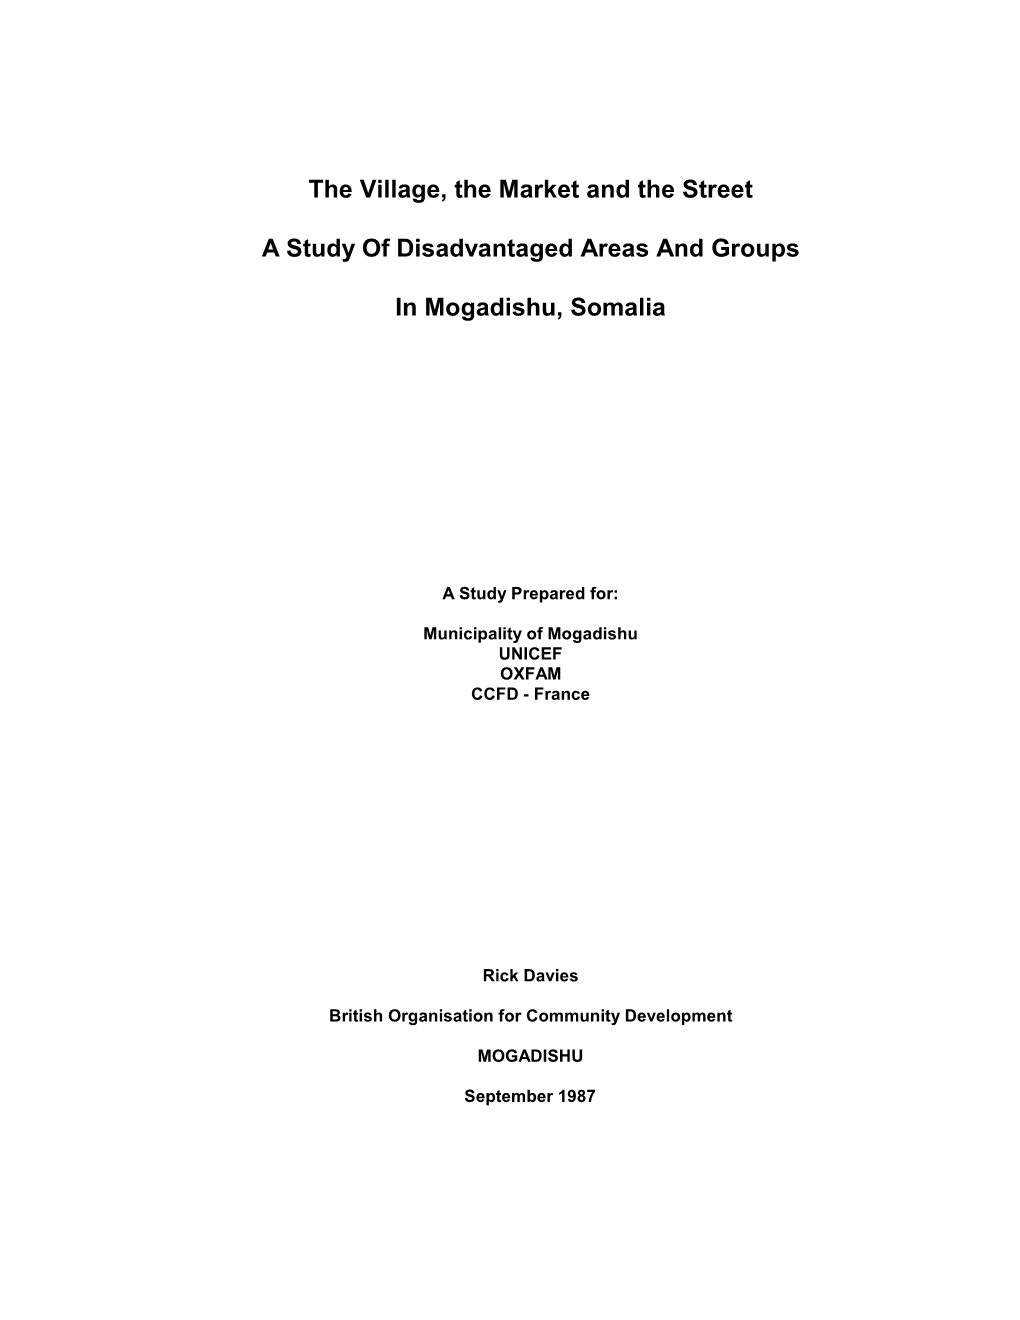 The Village, the Market and the Street a Study of Disadvantaged Areas